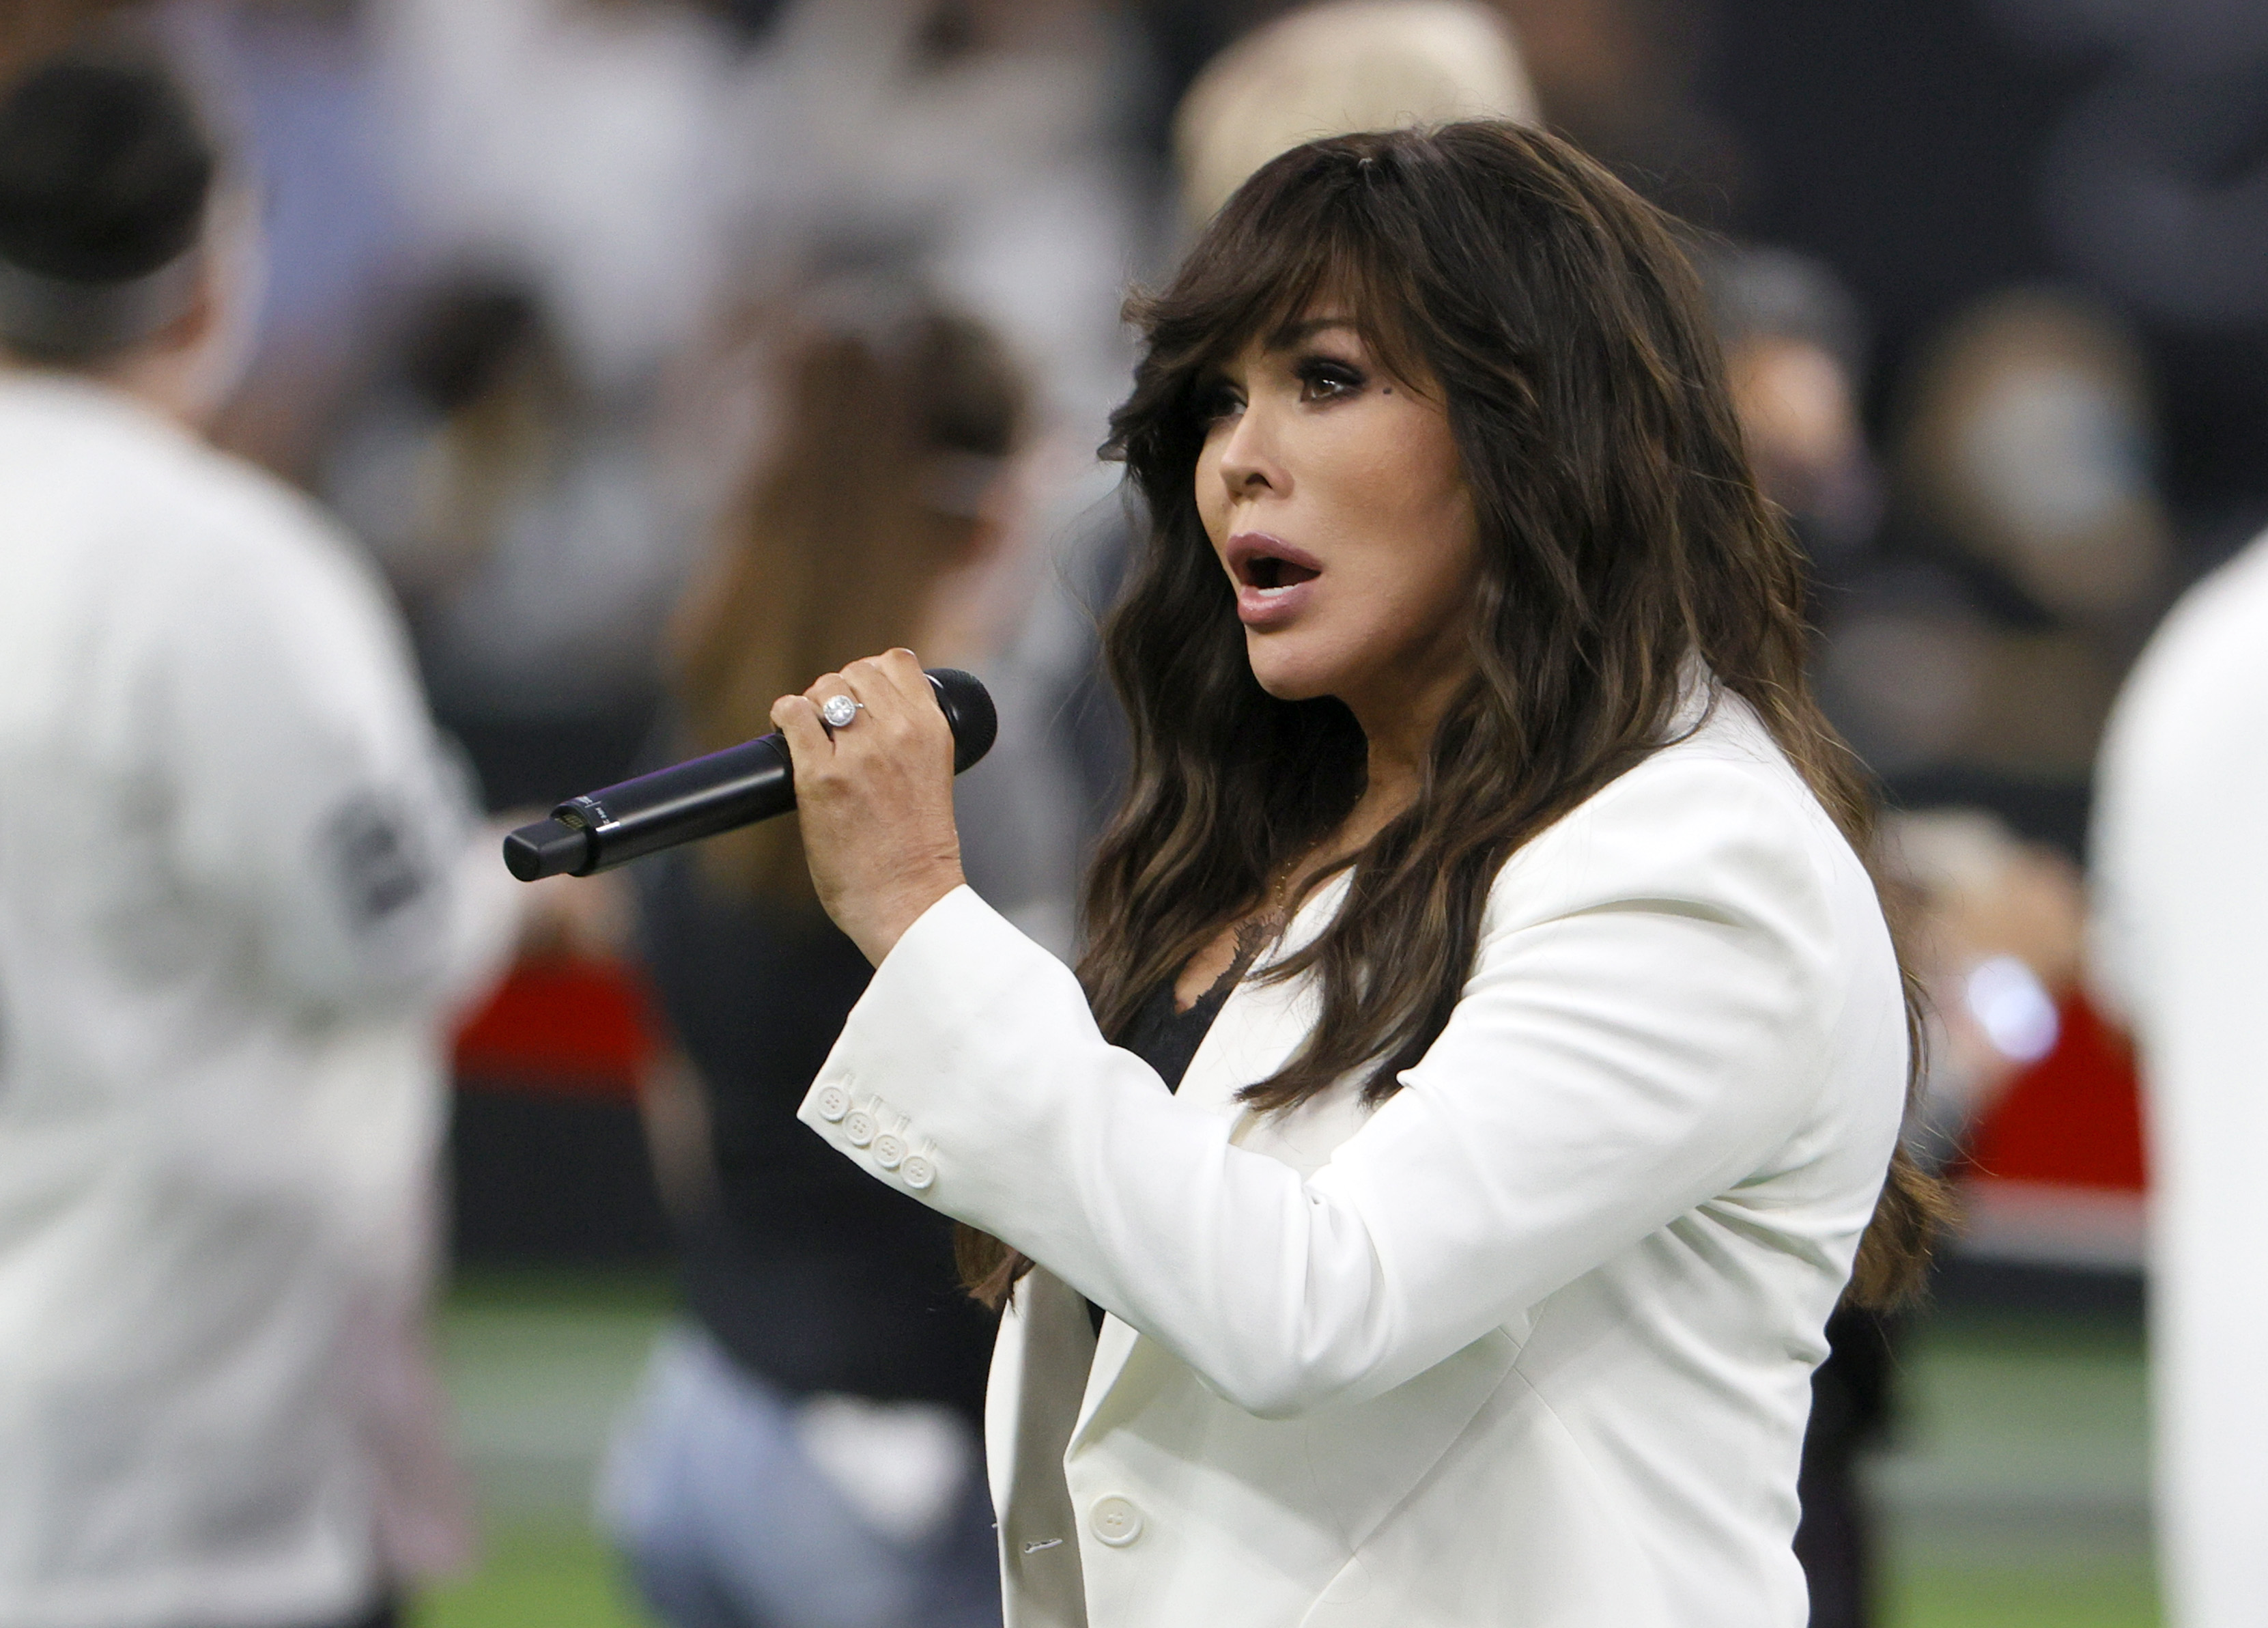 Marie Osmond sings the American national before a preseason game between the Seattle Seahawks and the Las Vegas Raiders in Las Vegas, Nevada on August 14, 2021. | Source: Getty Images